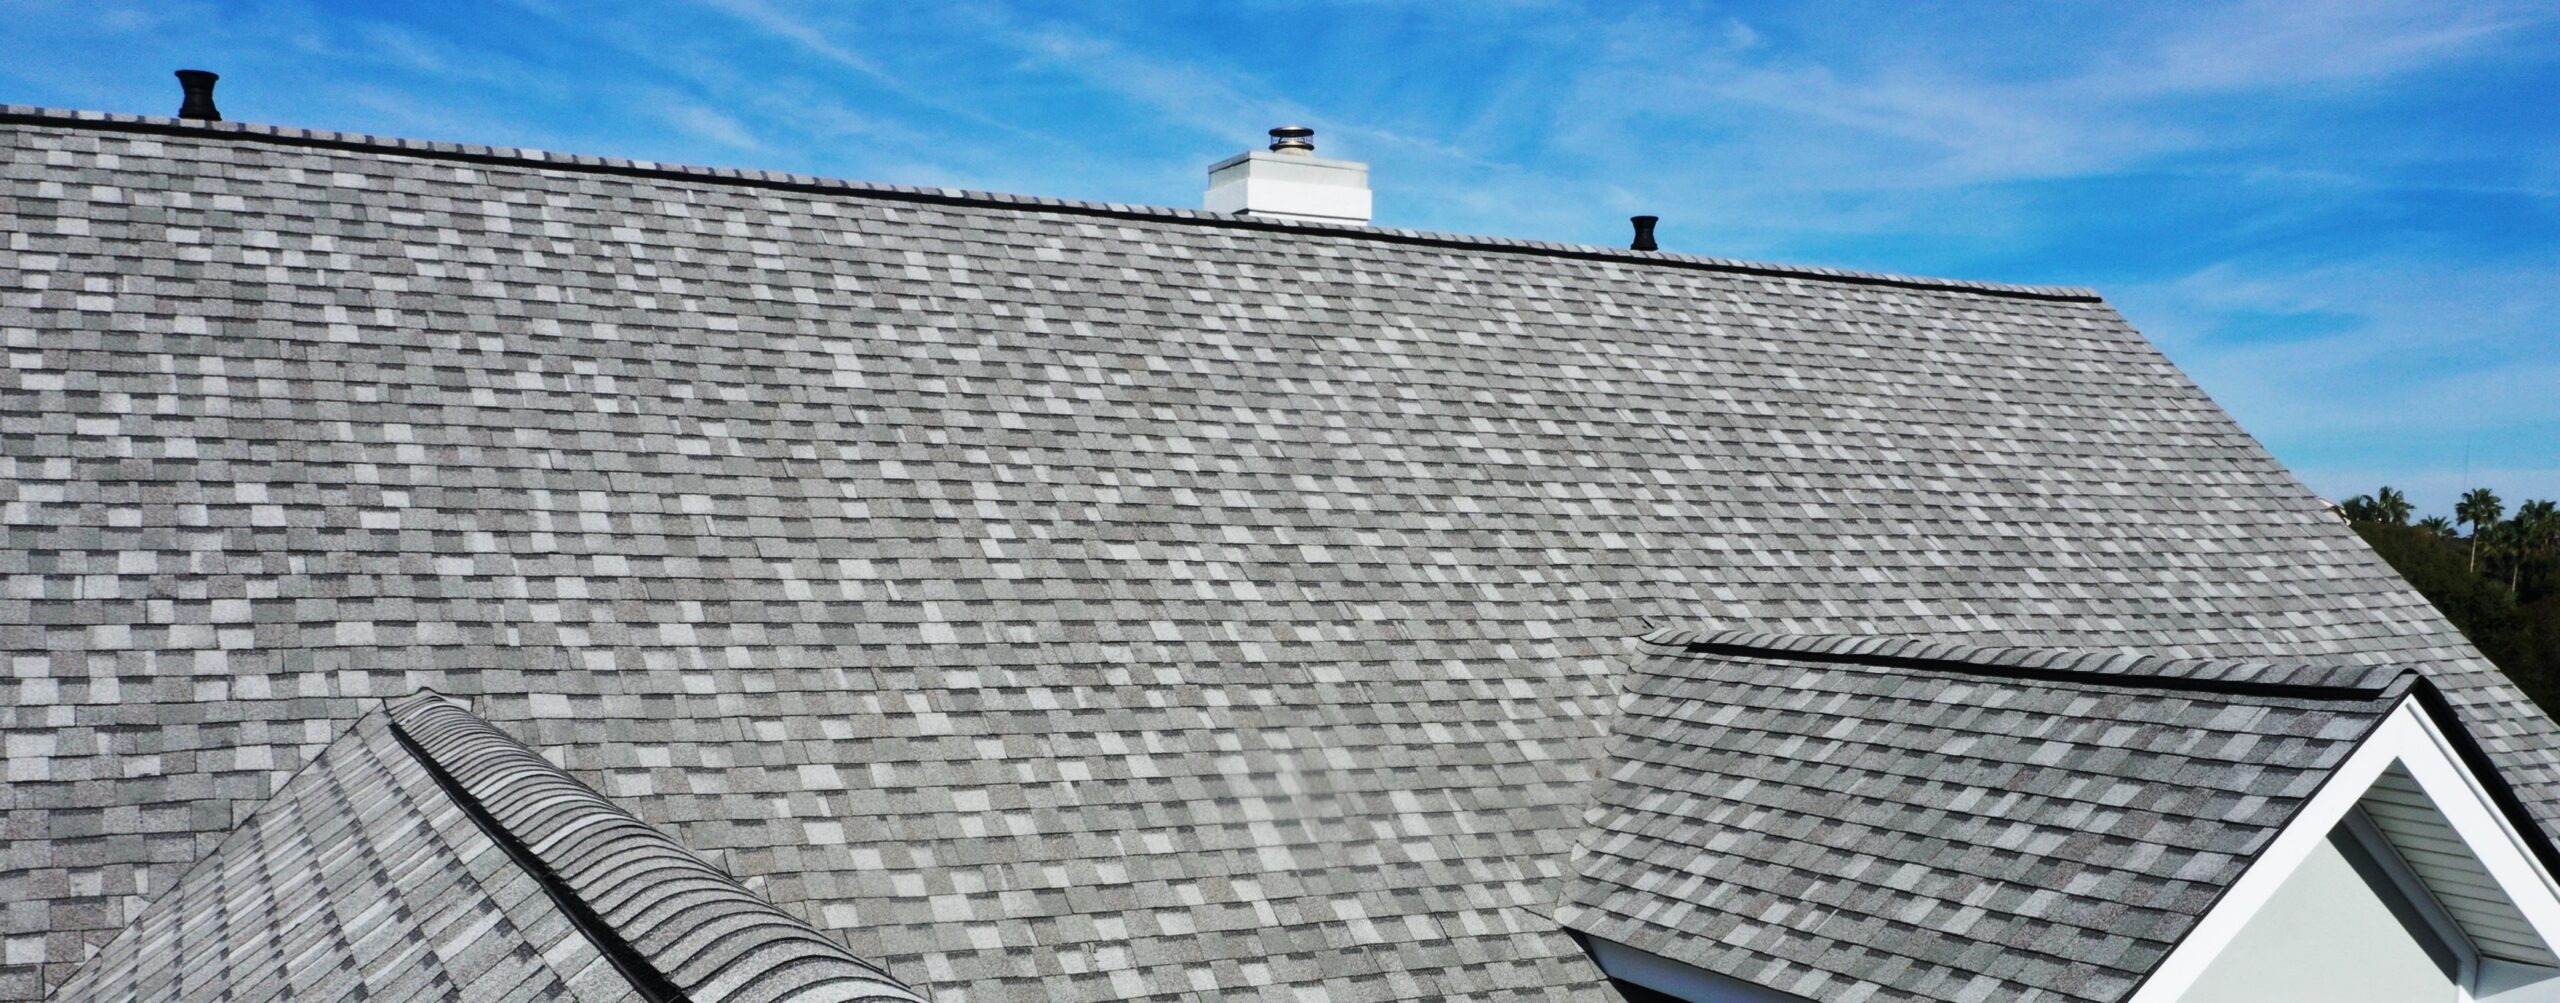 Synthetic Roofing Material - About Weather Stop Roofing Greater Cincinnati